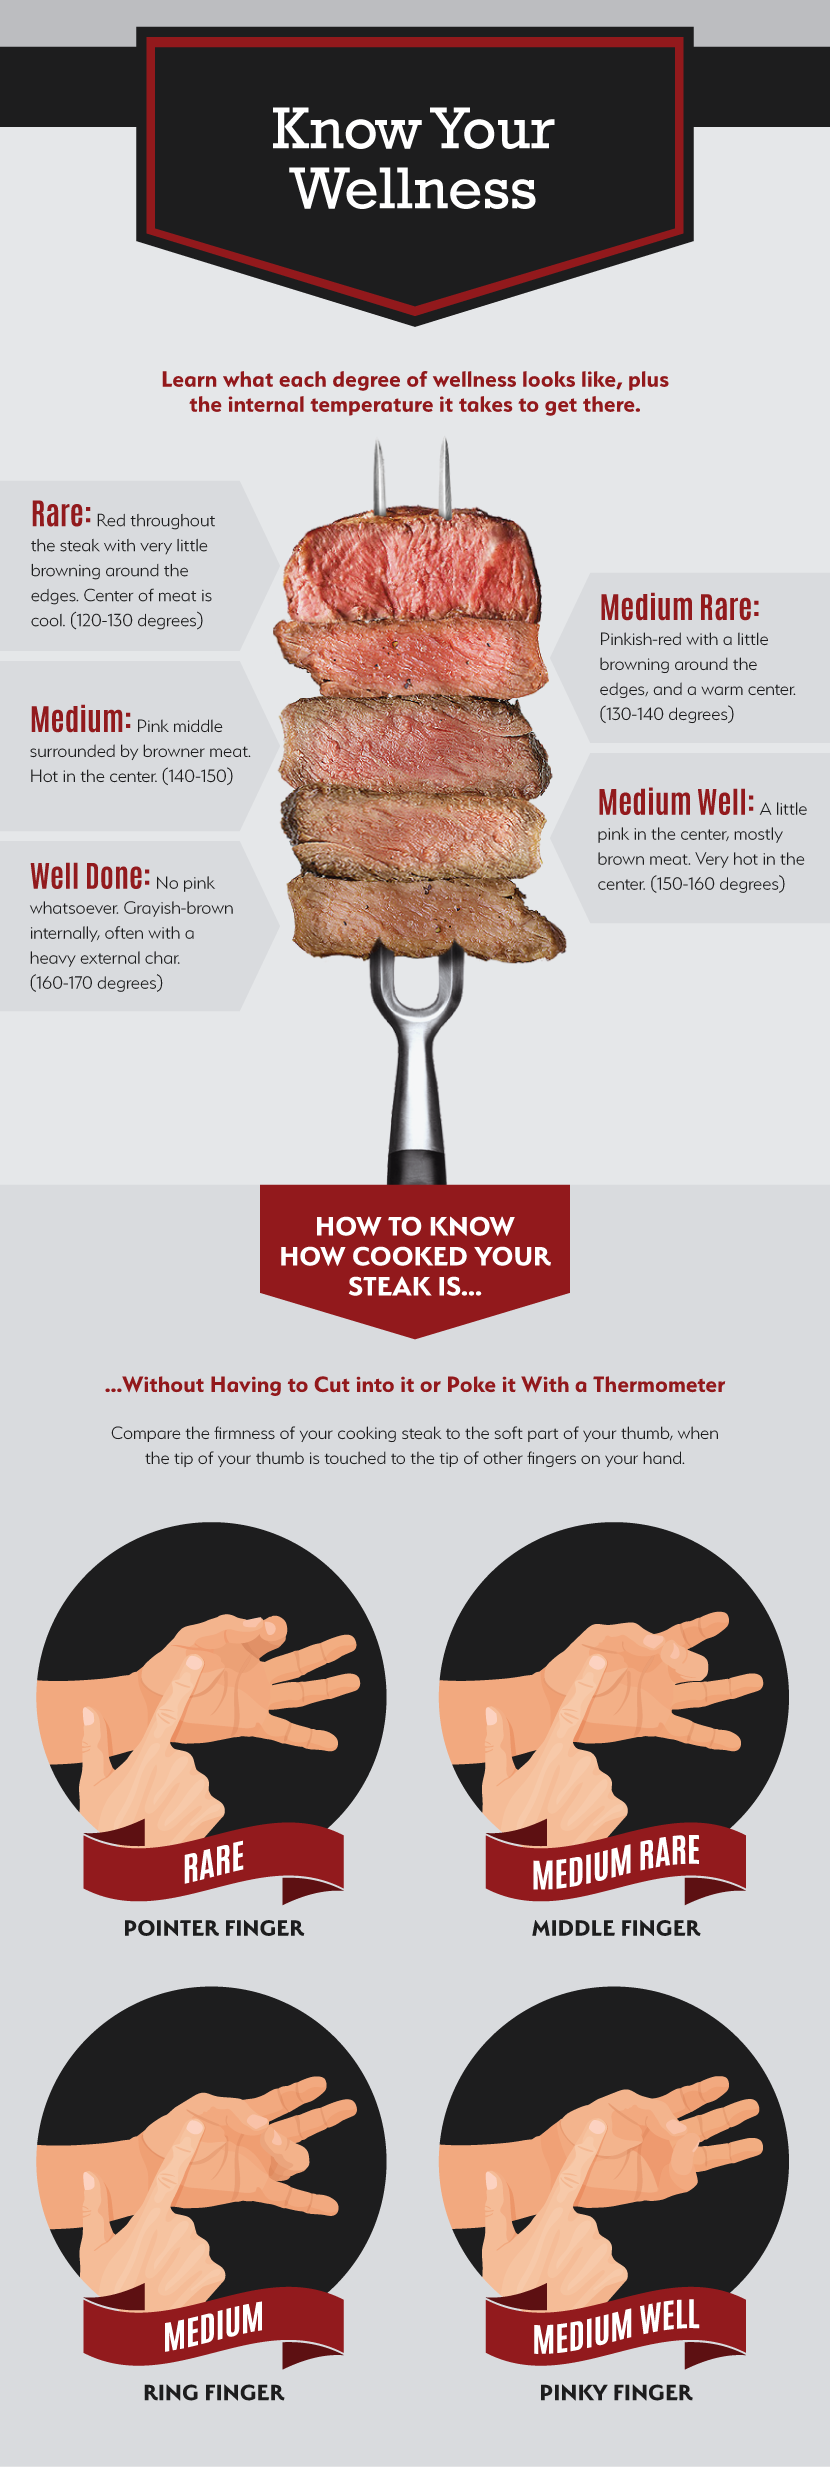 How to Cook Steak - Know Your Wellness